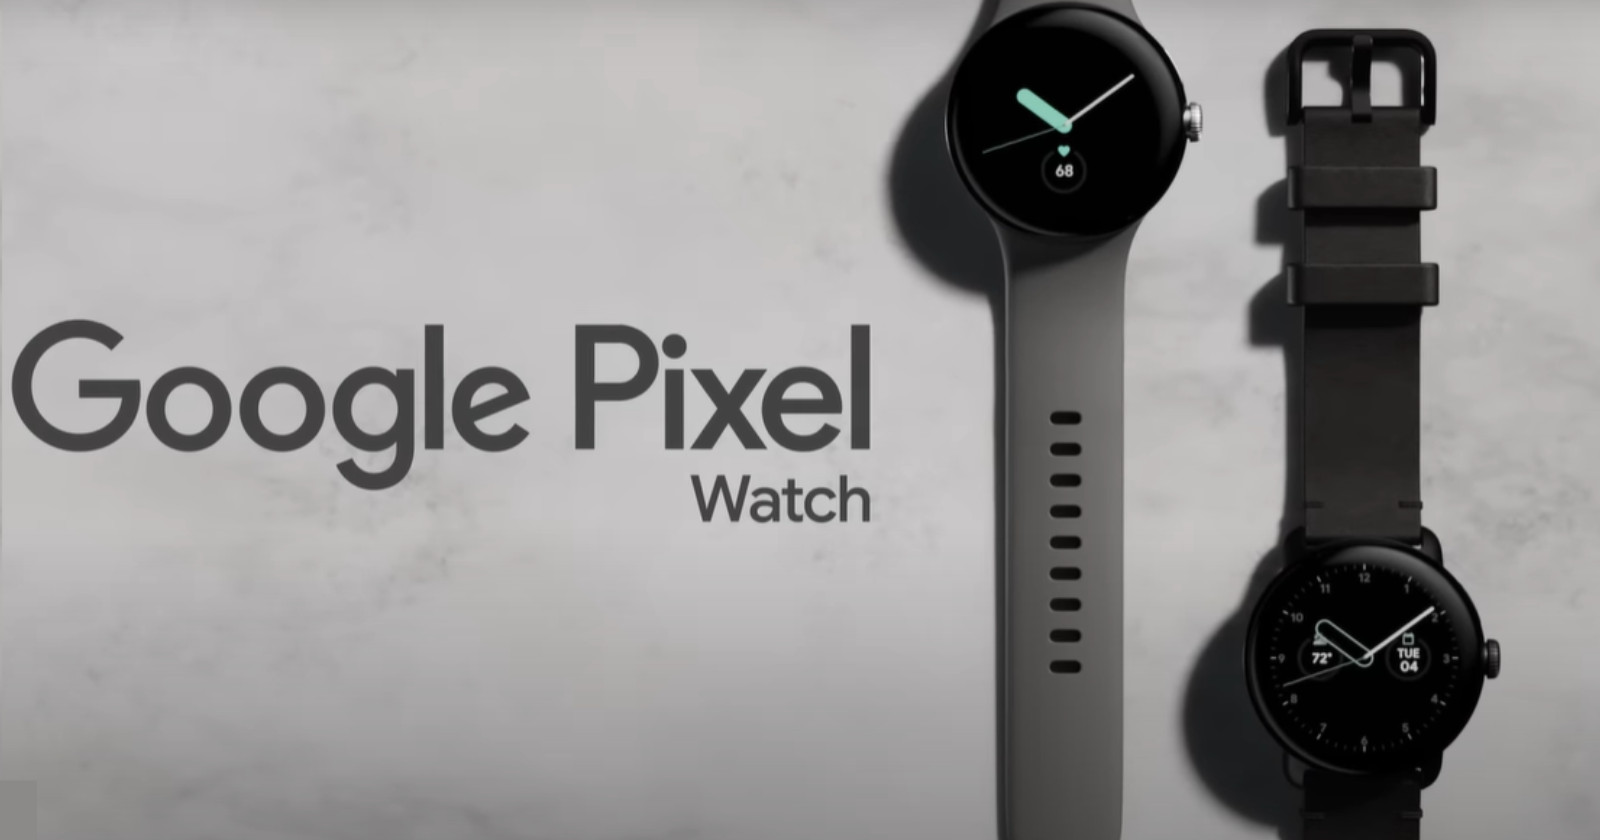 Save up to 60% on the Google Pixel Watch (Wi-Fi) in Germany on Amazon and other online stores